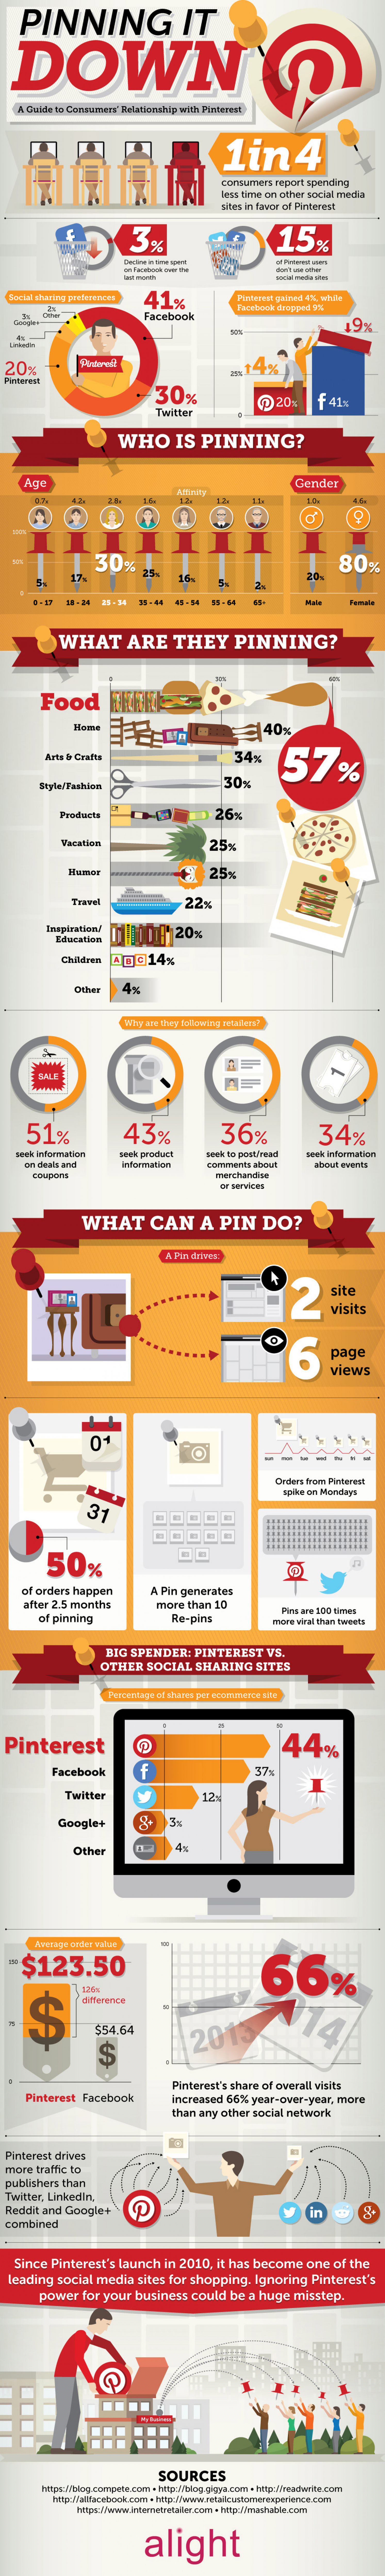 Pinning it Down: A Guide to Consumers’ Relationship with Pinterest Infographic